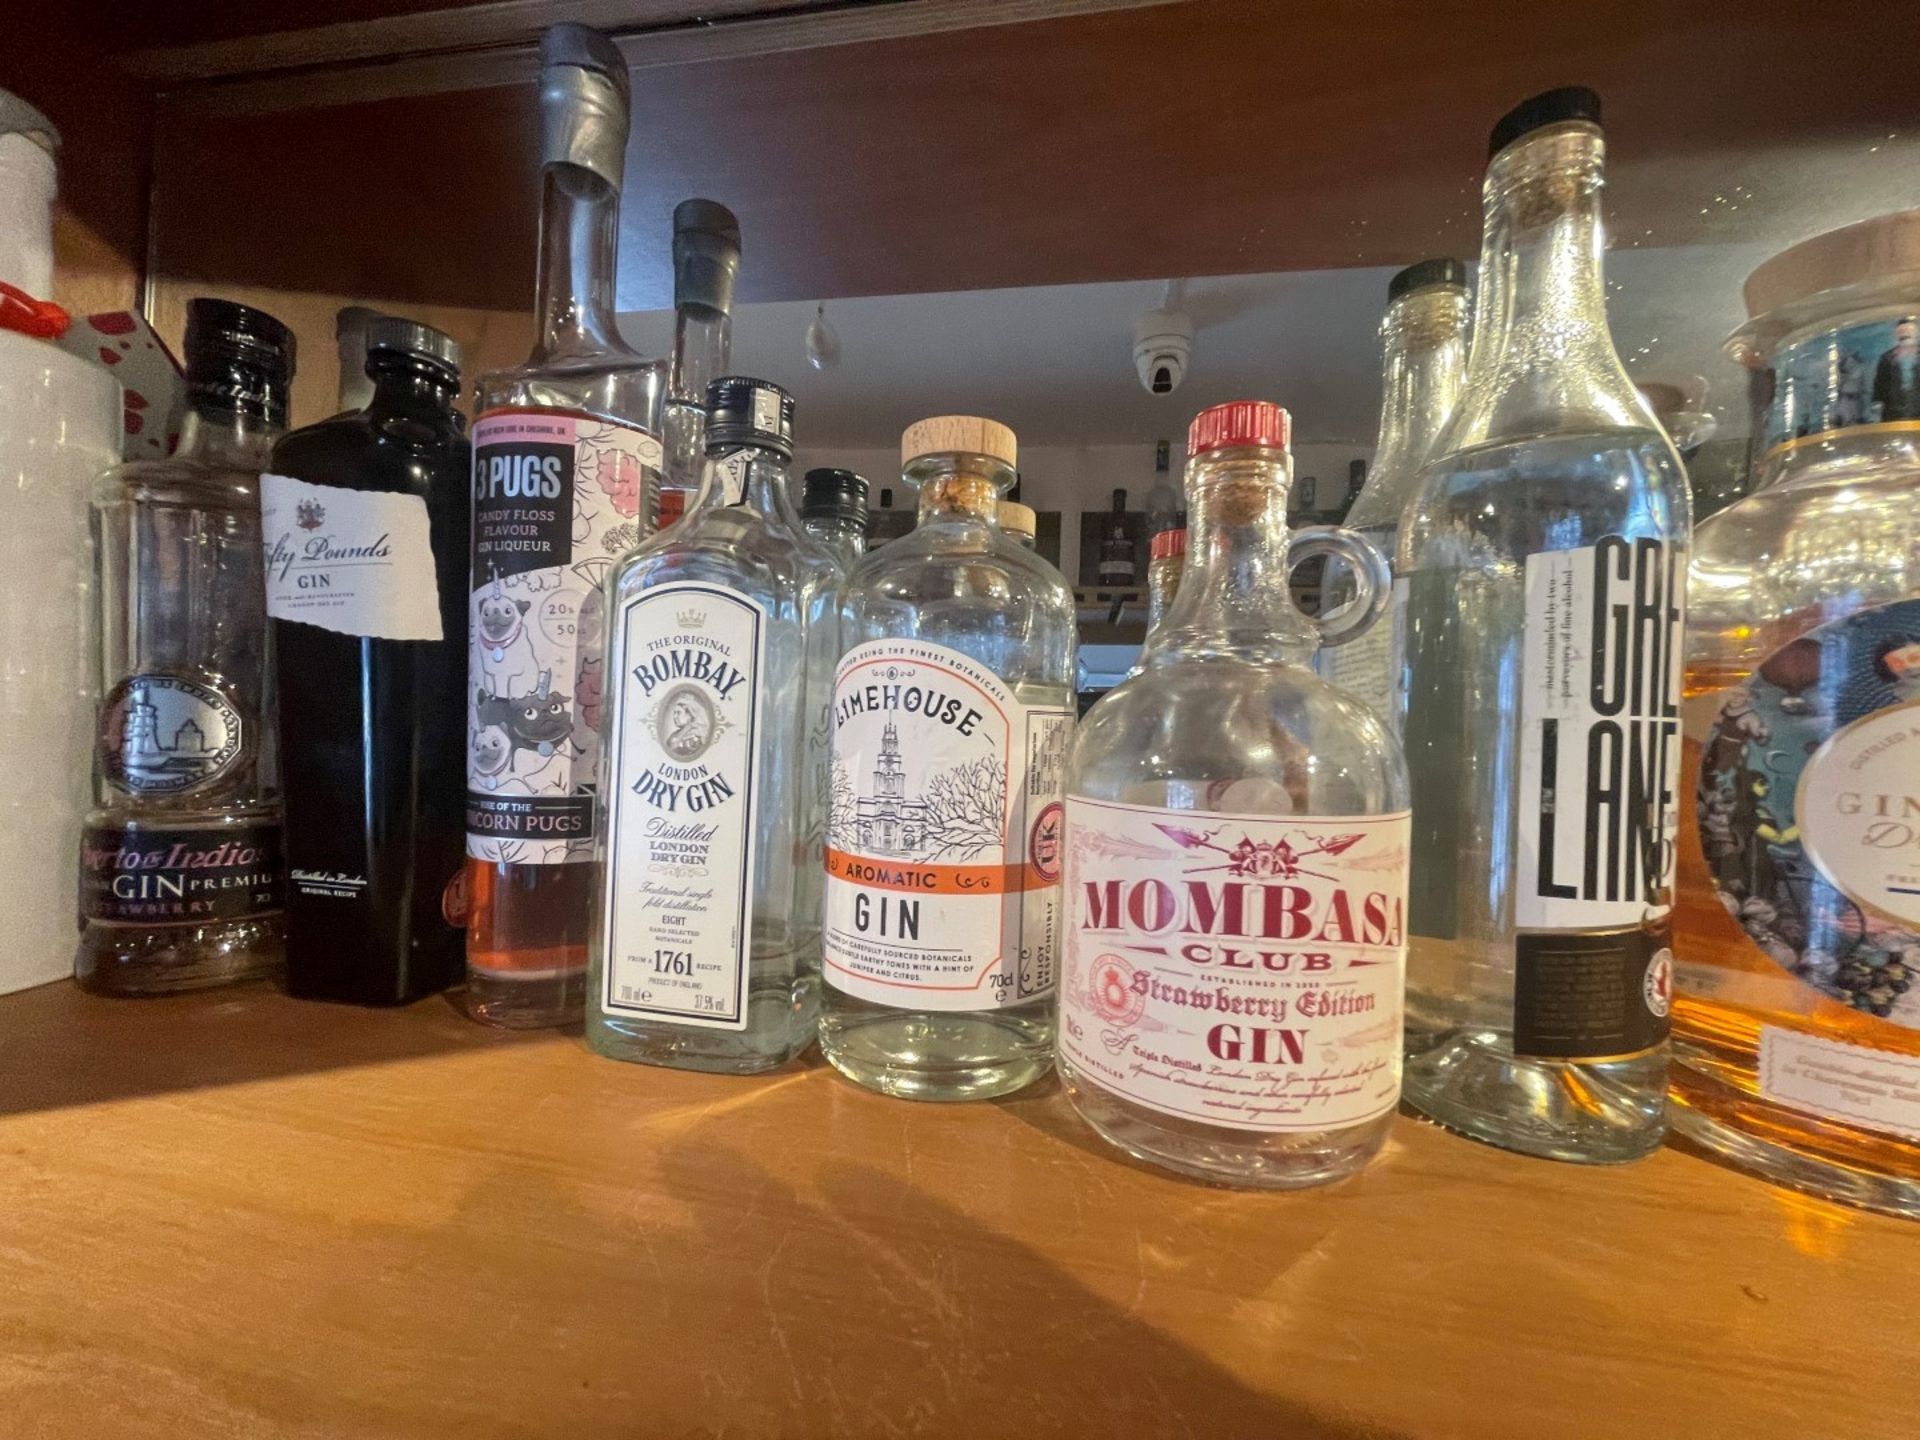 14 x Bottles of Various Craft Gin - Includes JJ Whitley, Limehouse, Nelsons and More - Part Used - Image 6 of 14